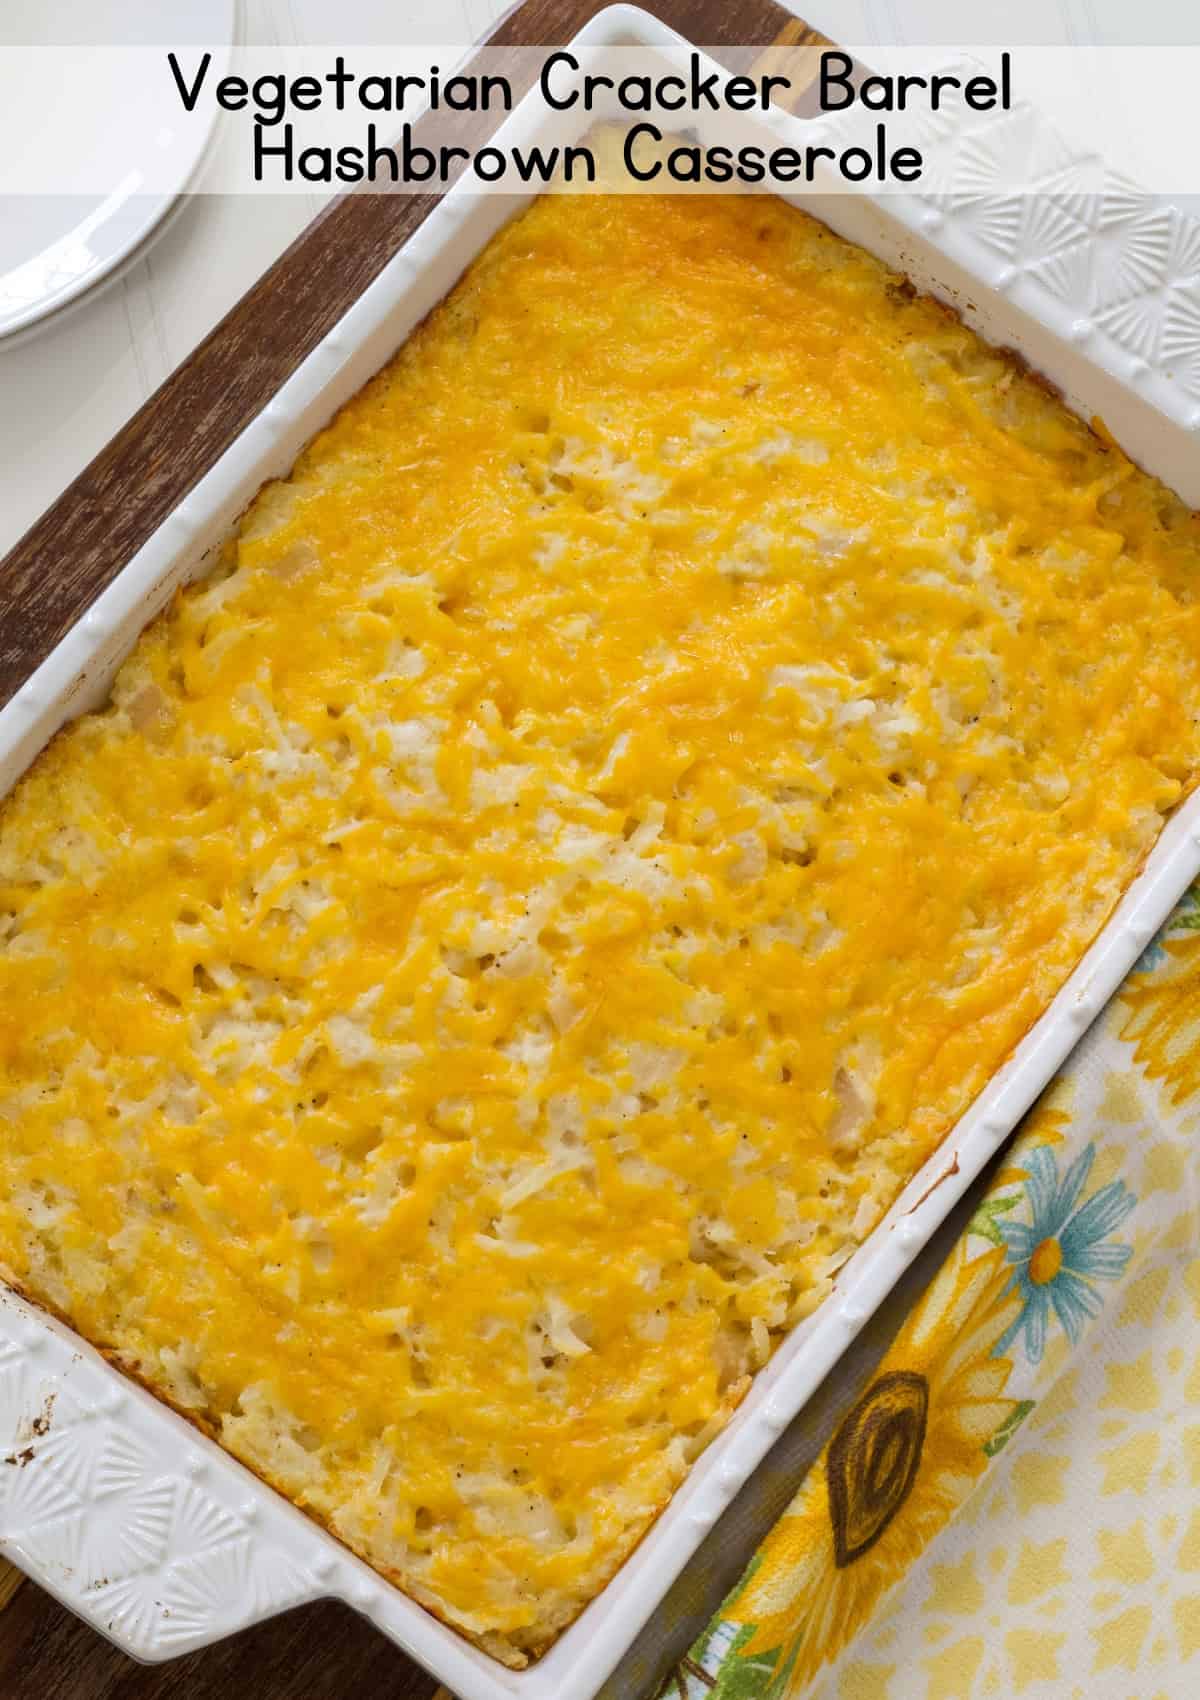 A rectangle casserole dish with the baked Vegetarian Cracker Barrel Hashbrown Casserole in it with the recipe title above it so the image can be pinned on Pinterest.